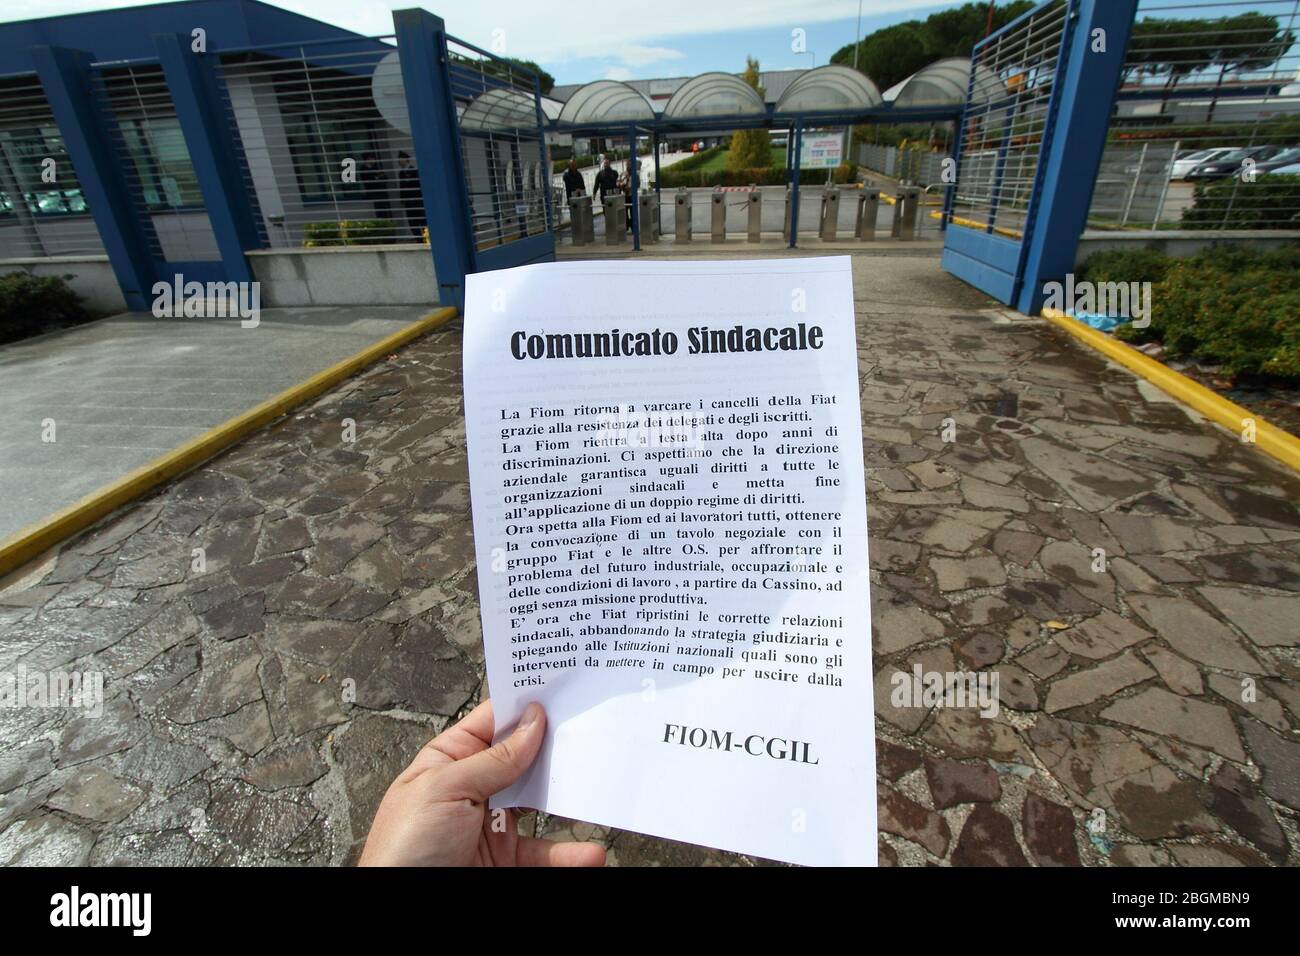 Cassino, Italy - October 9, 2013: A Fiom-Cgil flyer in front of the gates of the Fiat FCA factory in Cassino Stock Photo